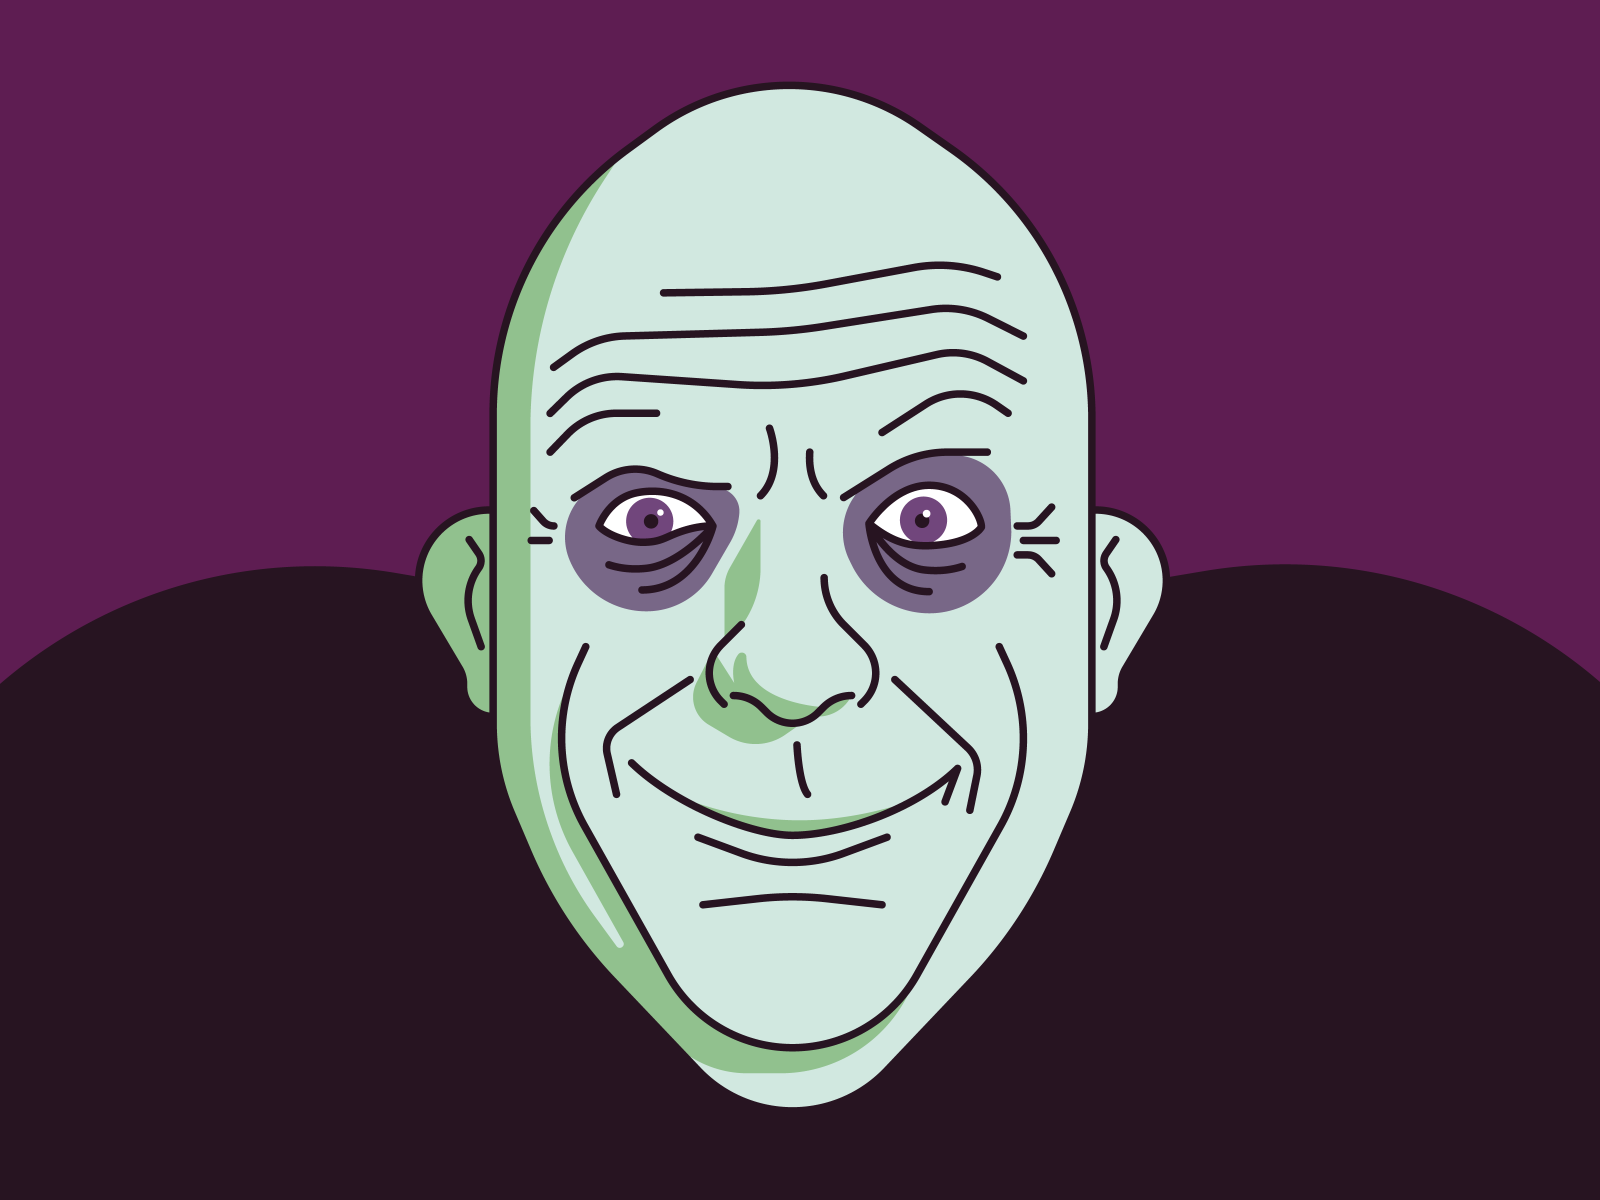 Uncle Fester by Aaron Grable on Dribbble